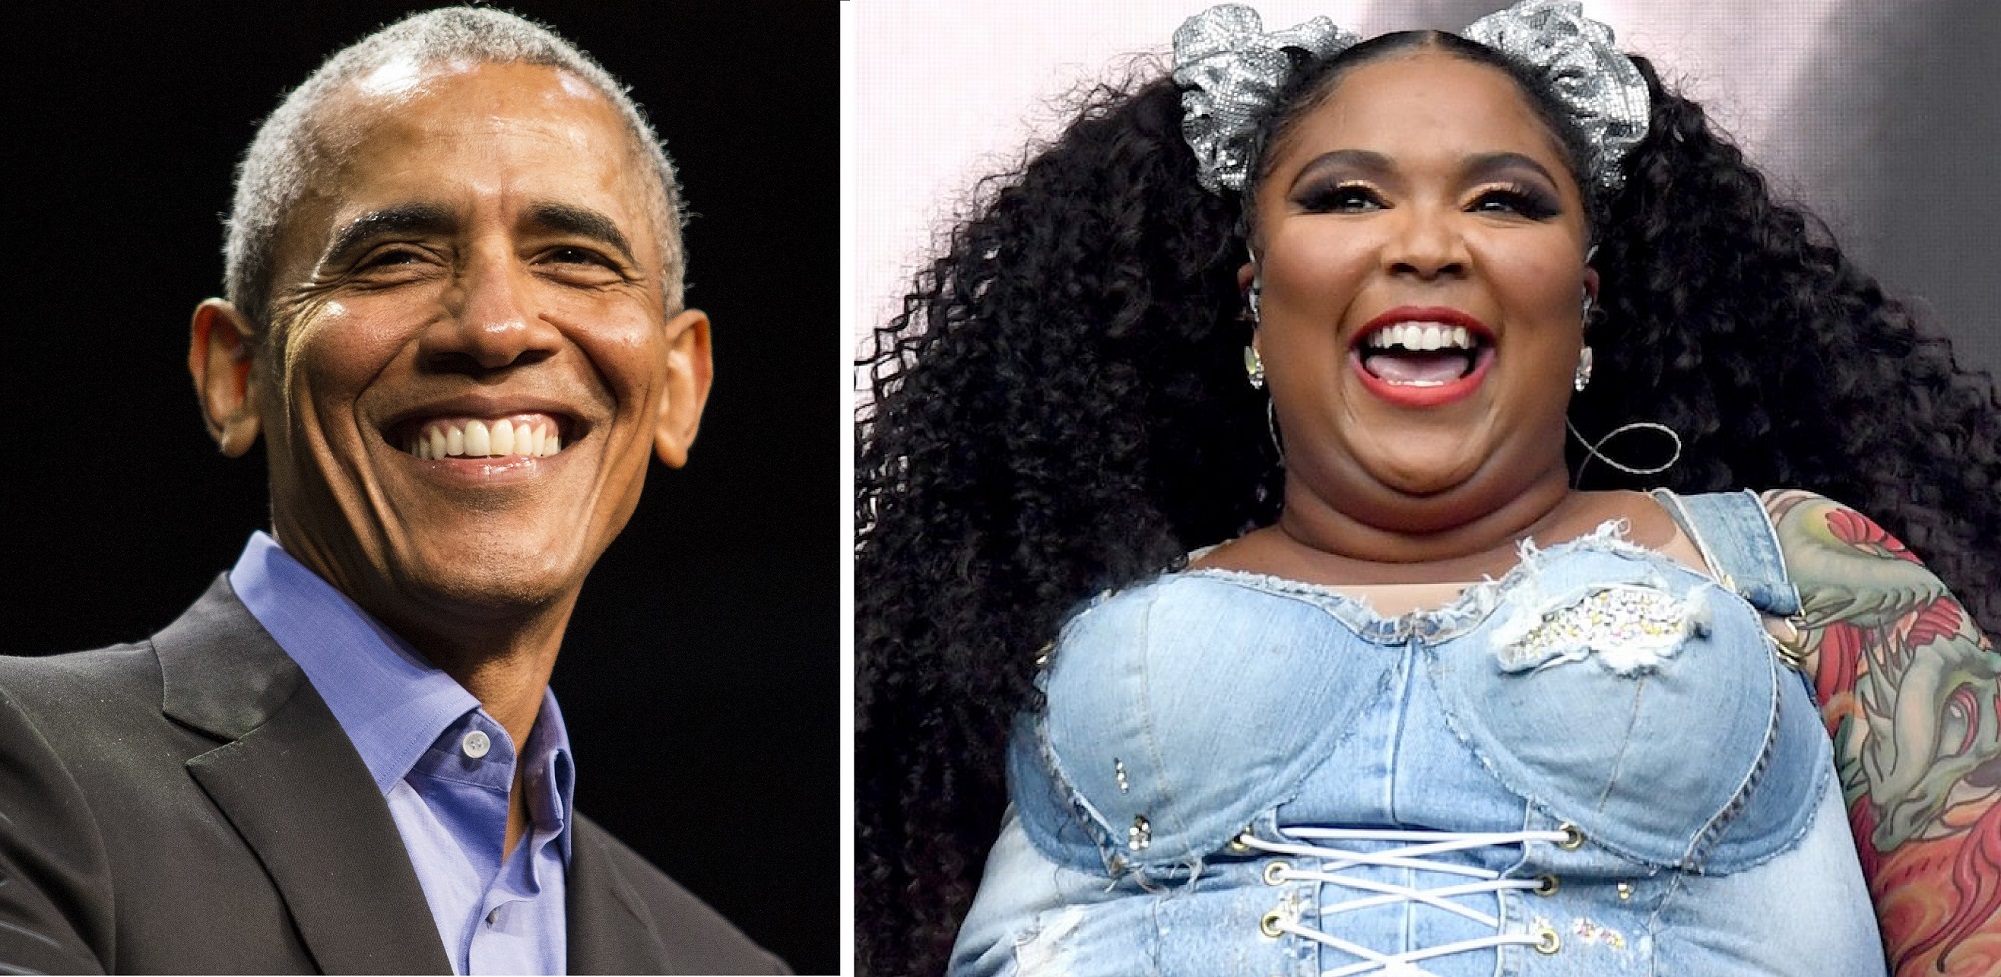 Barack Obama Shares The List Of His Favorite Music From 2019. Find Out Who Made the Cut…